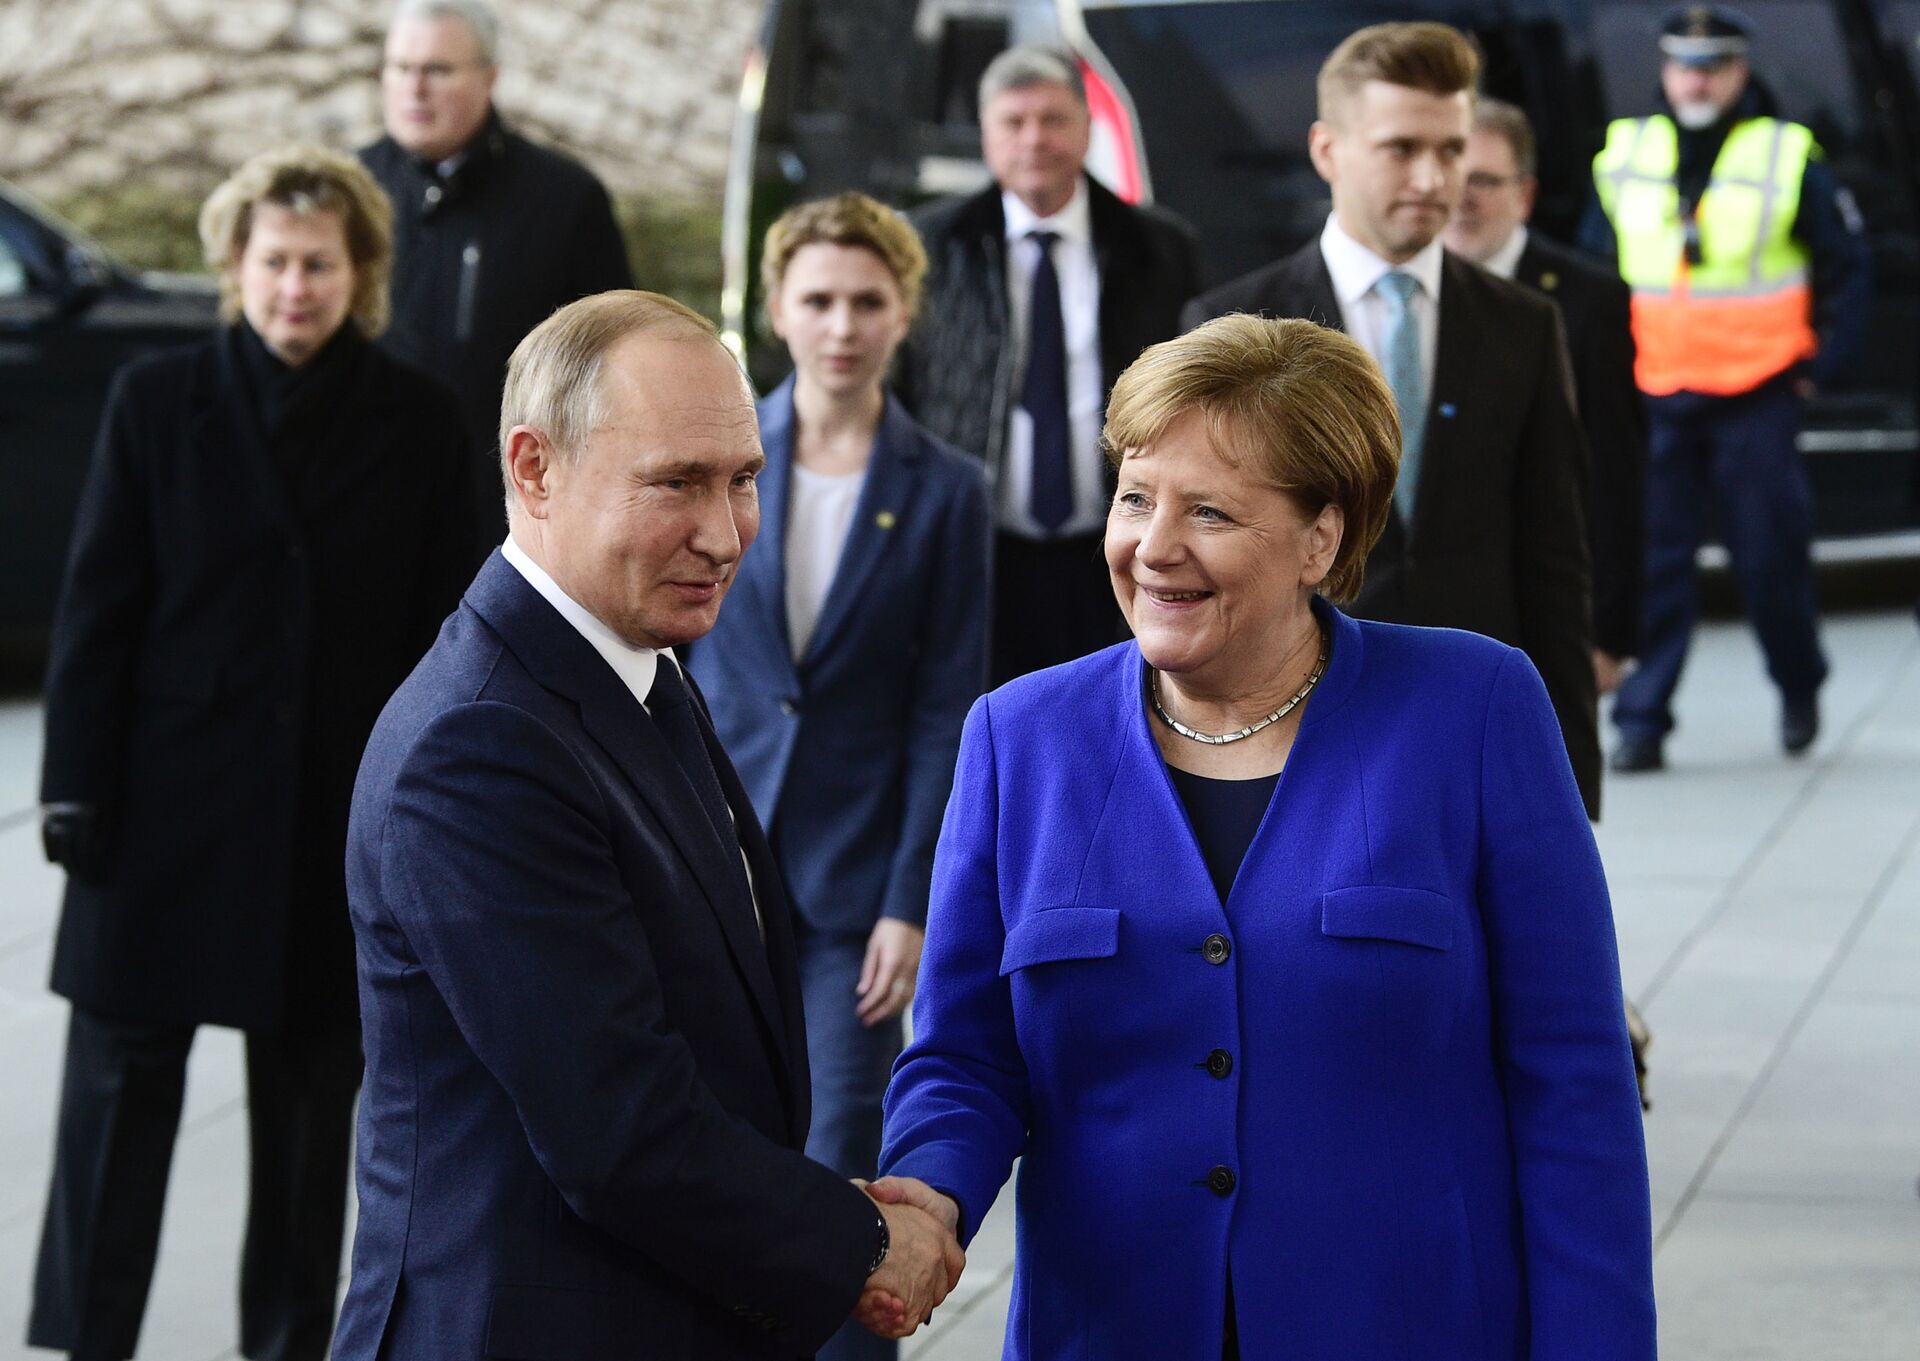 German Chancellor Angela Merkel, right, shakes hands with Russian President Vladimir Putin during arrivals for a conference on Libya at the chancellery in Berlin, Germany, Sunday, Jan. 19, 2020 - Sputnik International, 1920, 07.09.2021